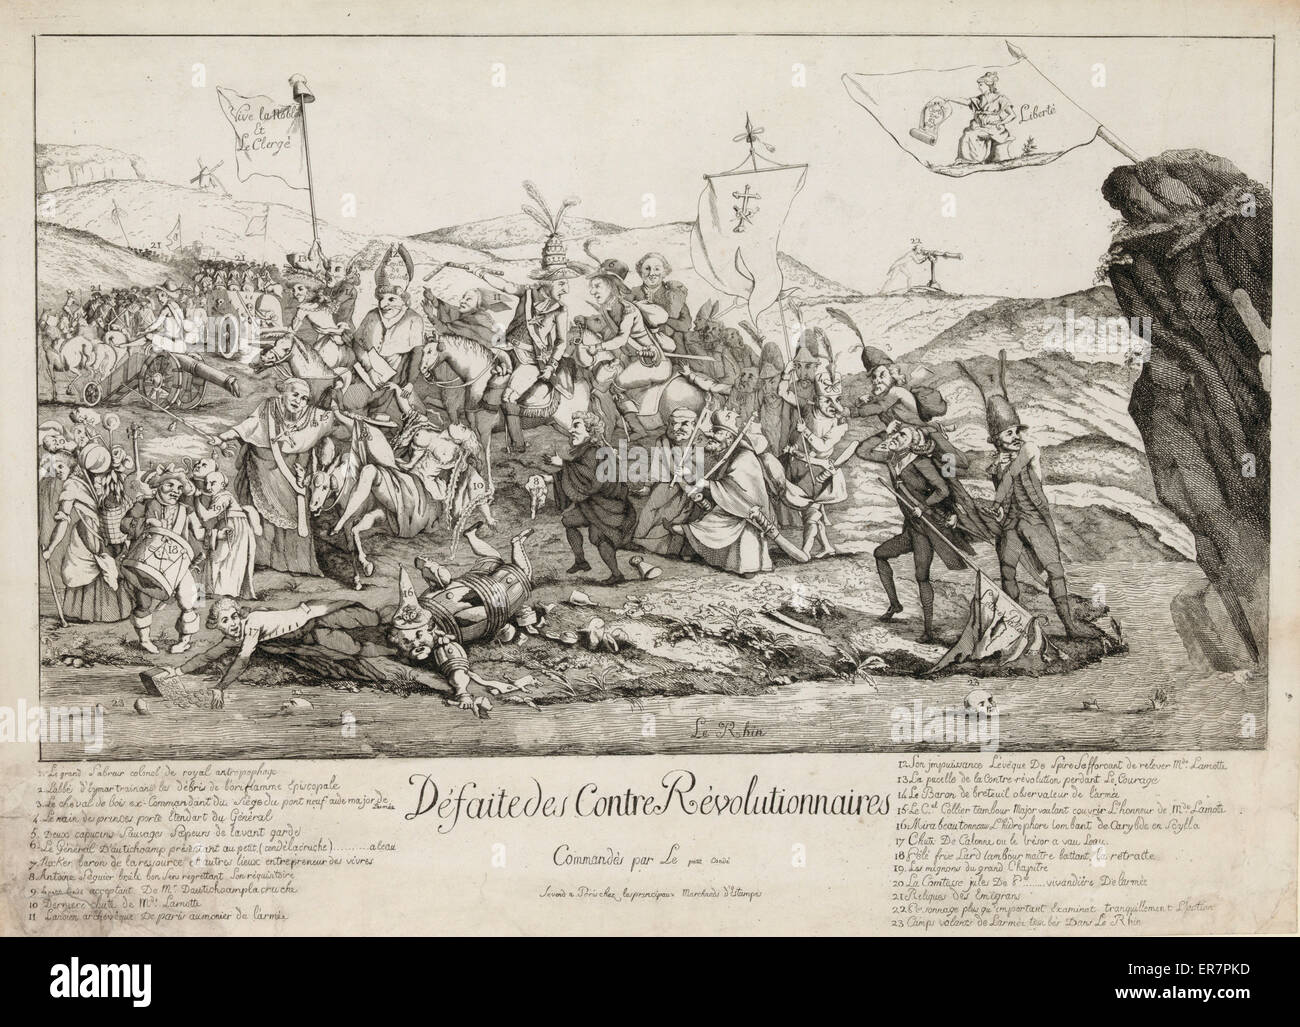 Defaite des contre revolutionnaires, commandes par le petit Conde. Print shows the retreating counterrevolutionary army of the Prince de Conde following its failed attempt to restore the monarchy in France. Among the caricatured cast of counterrevolutiona Stock Photo